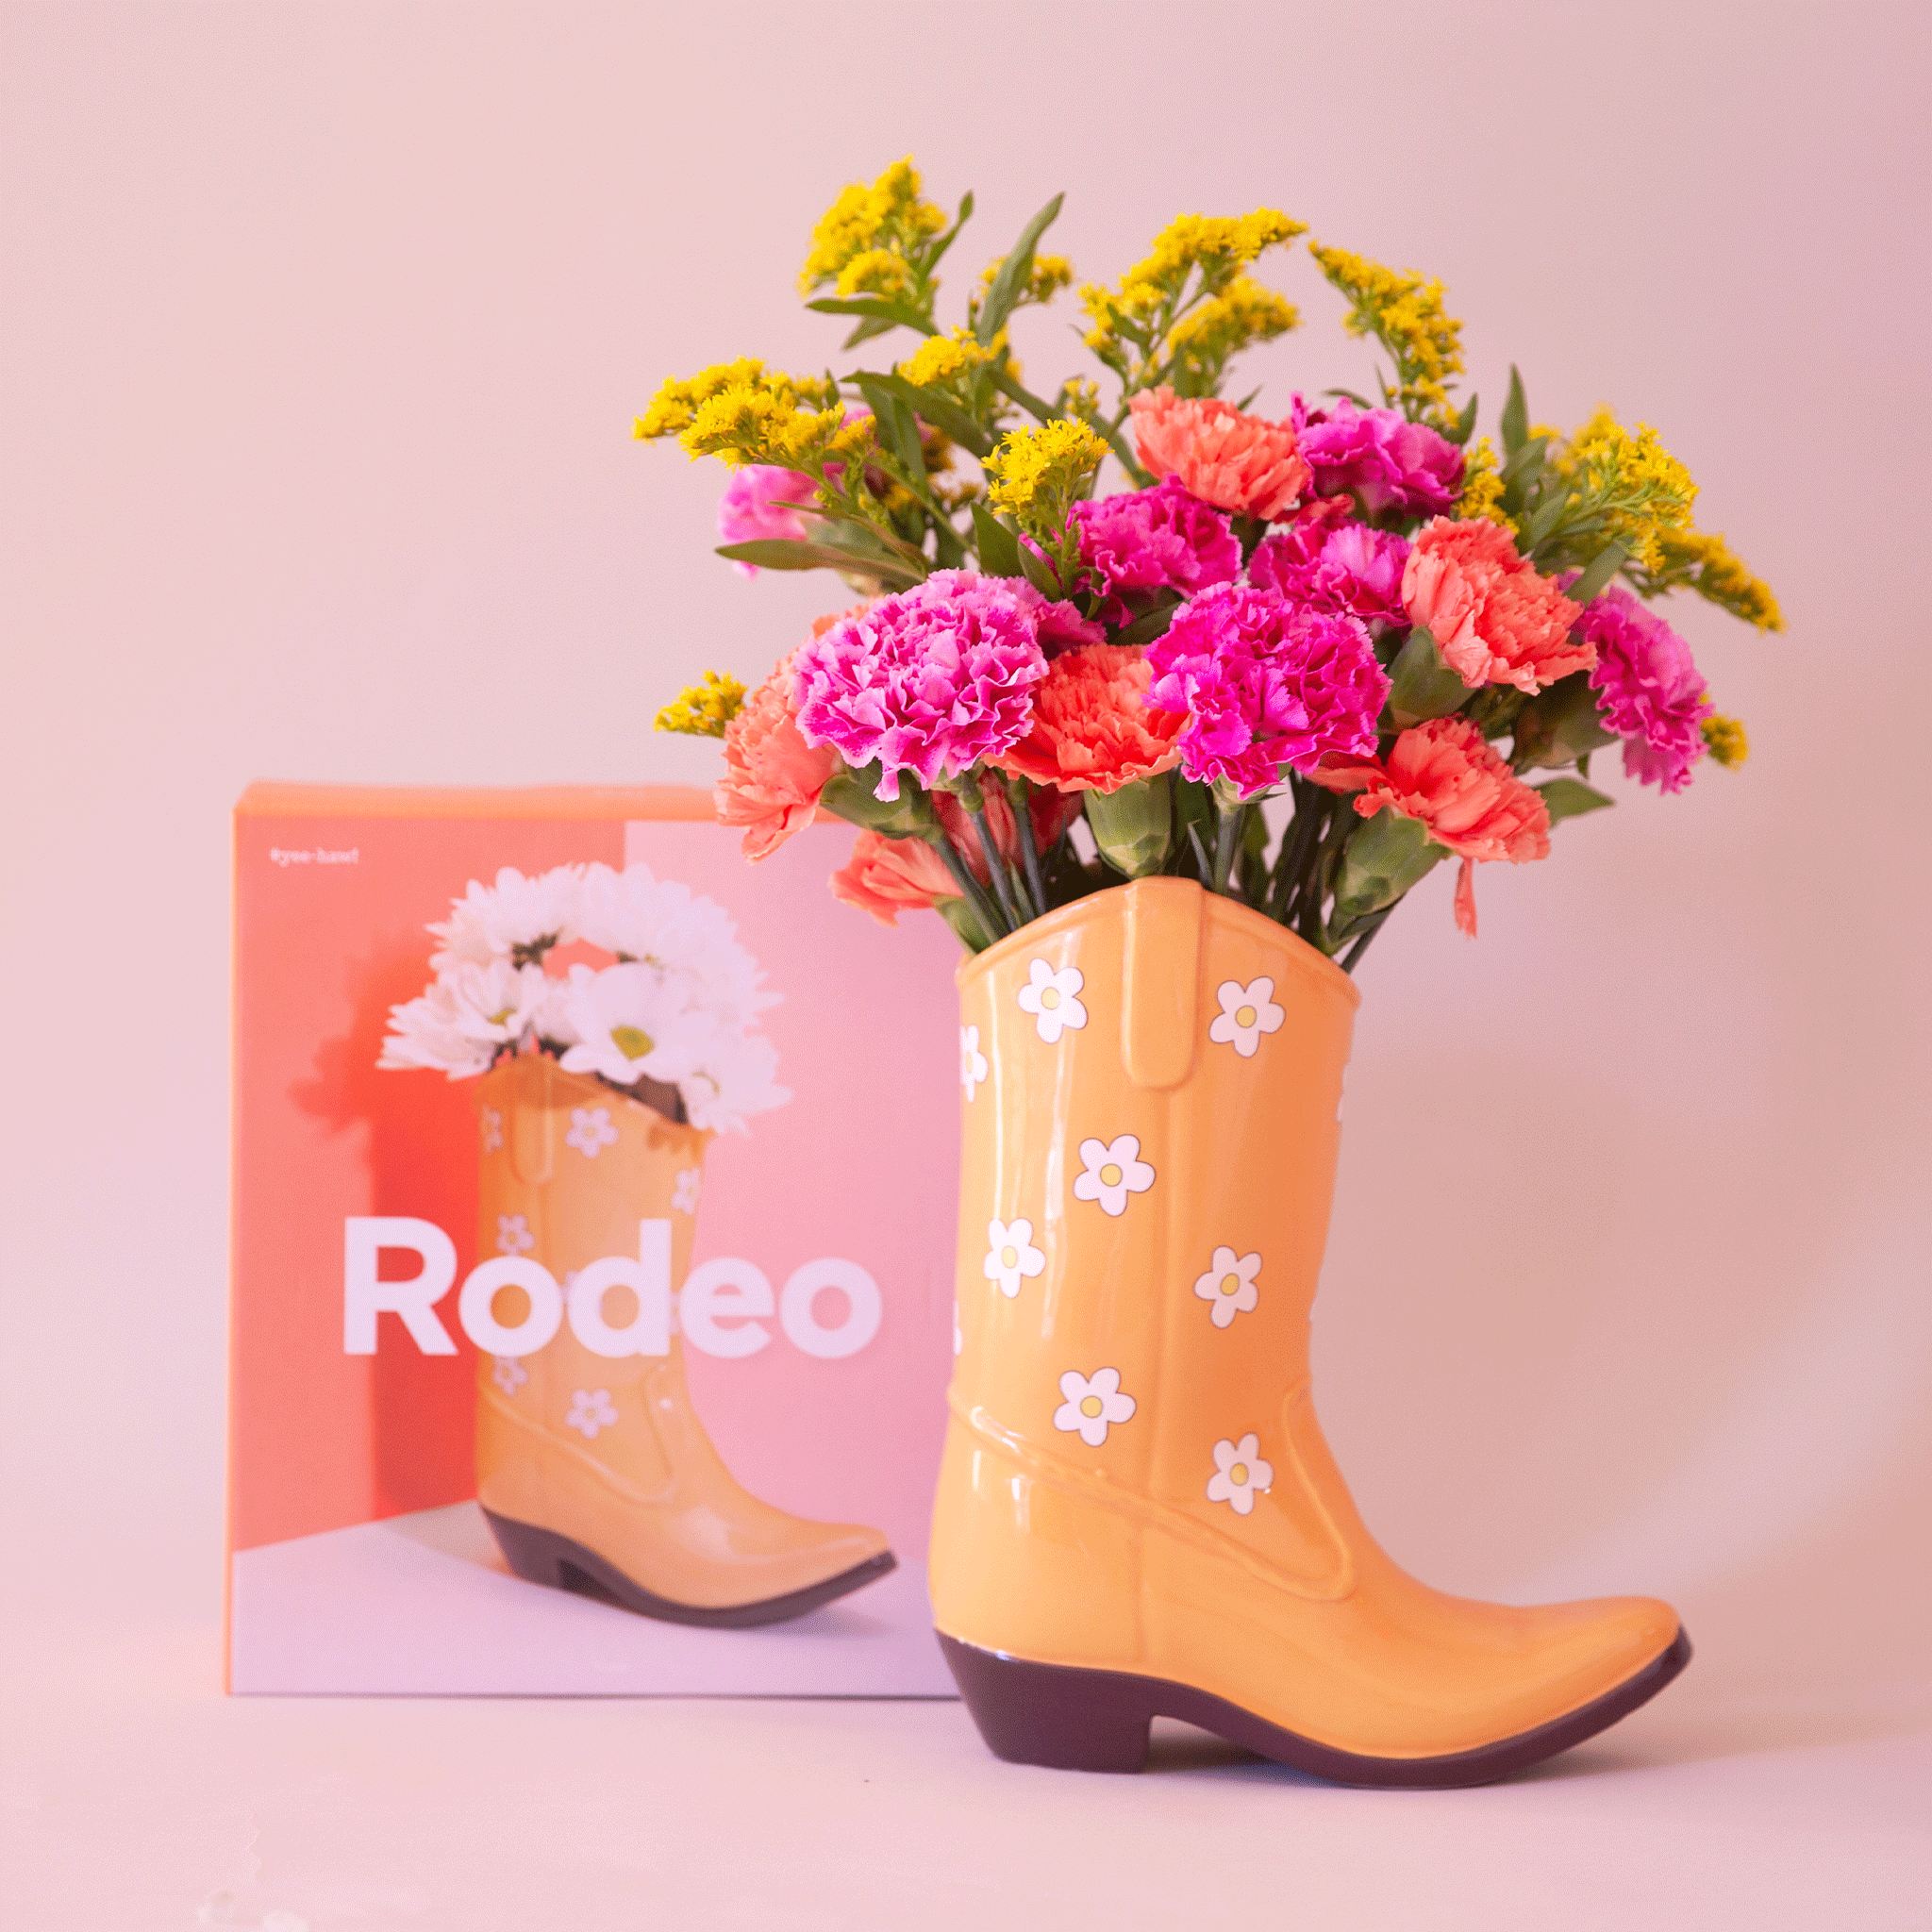 On a pink background is a yellow cowboy boot shaped vase with white and yellow daisy print all over. Flowers not included with purchase